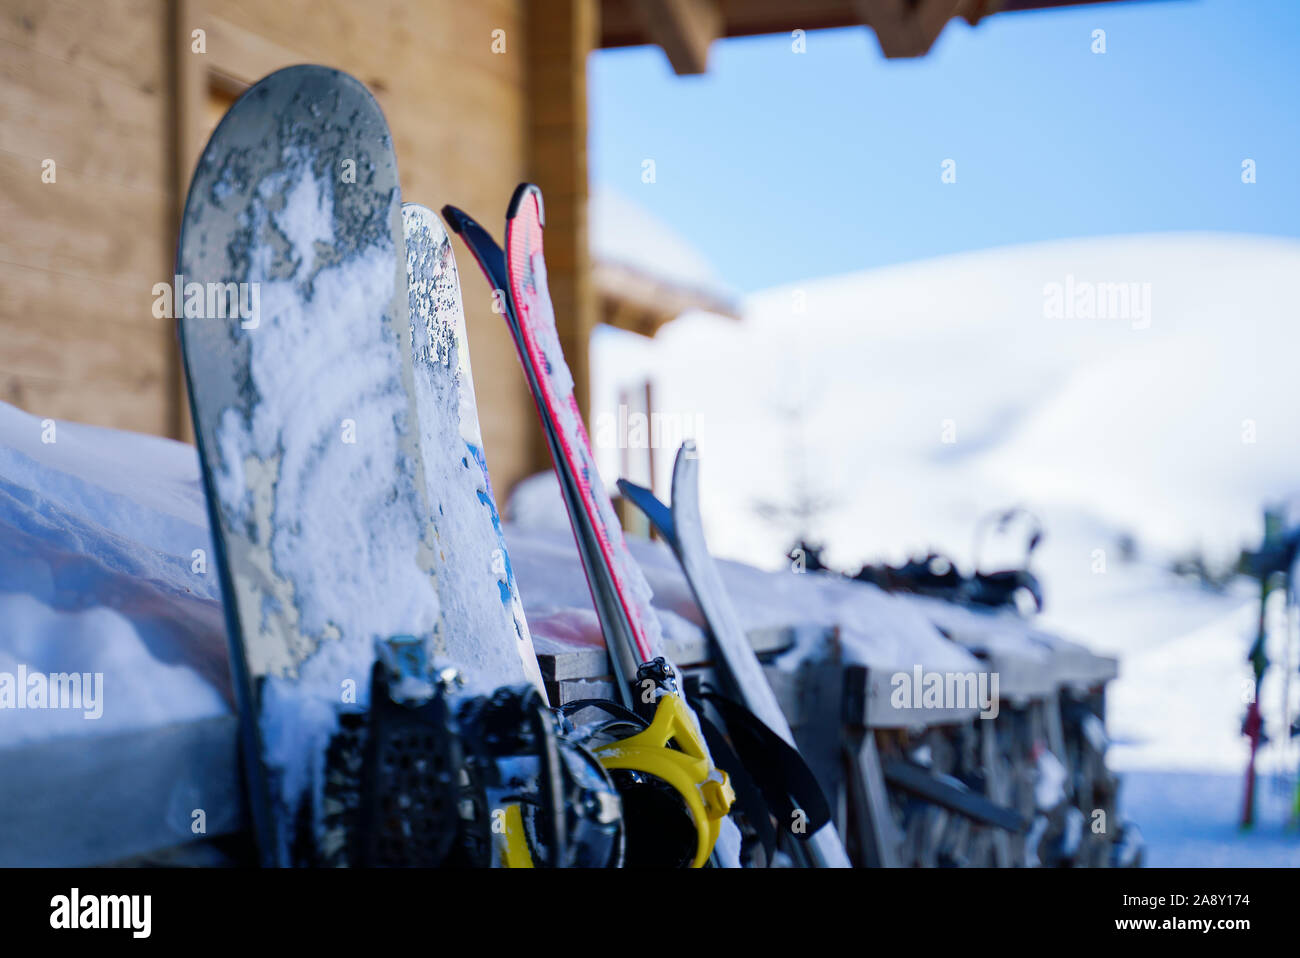 Image of multi-colored skis and snowboards in snow at winter resort in afternoon. Blurred background. Stock Photo